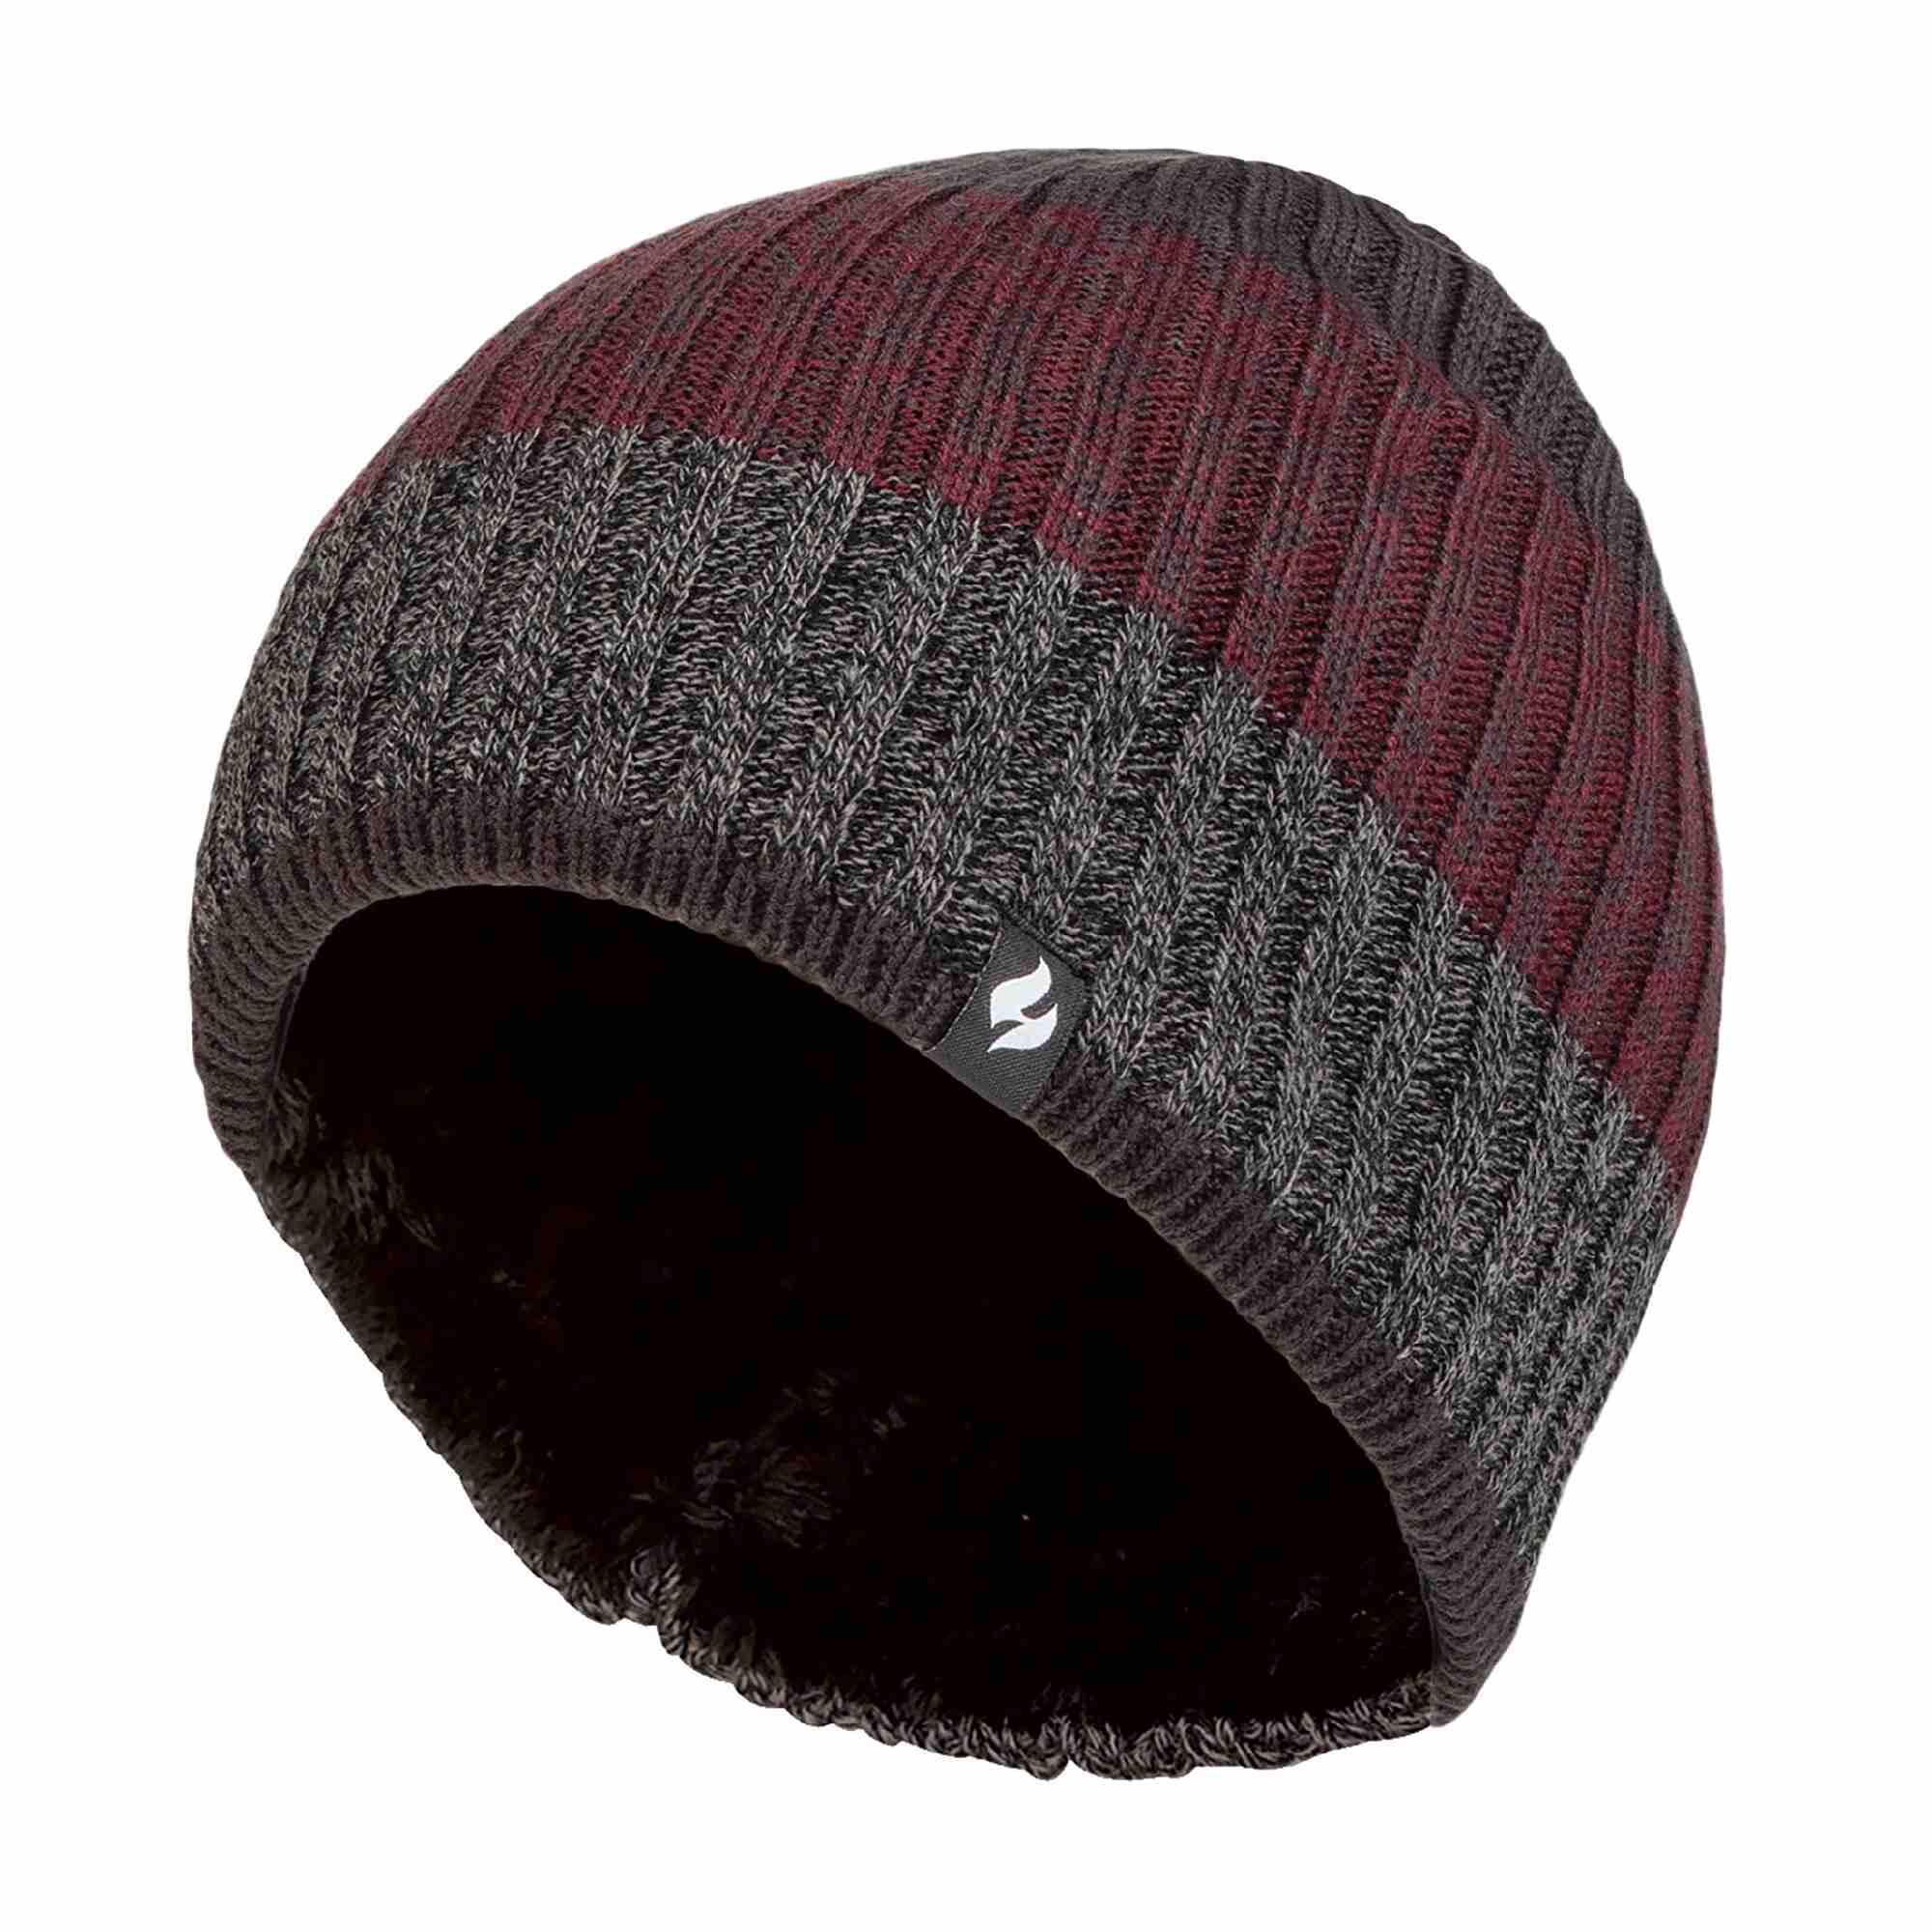 HEAT HOLDERS Mens Fleece Lined Striped Winter High Performance Soft Insulated Thermal Beanie